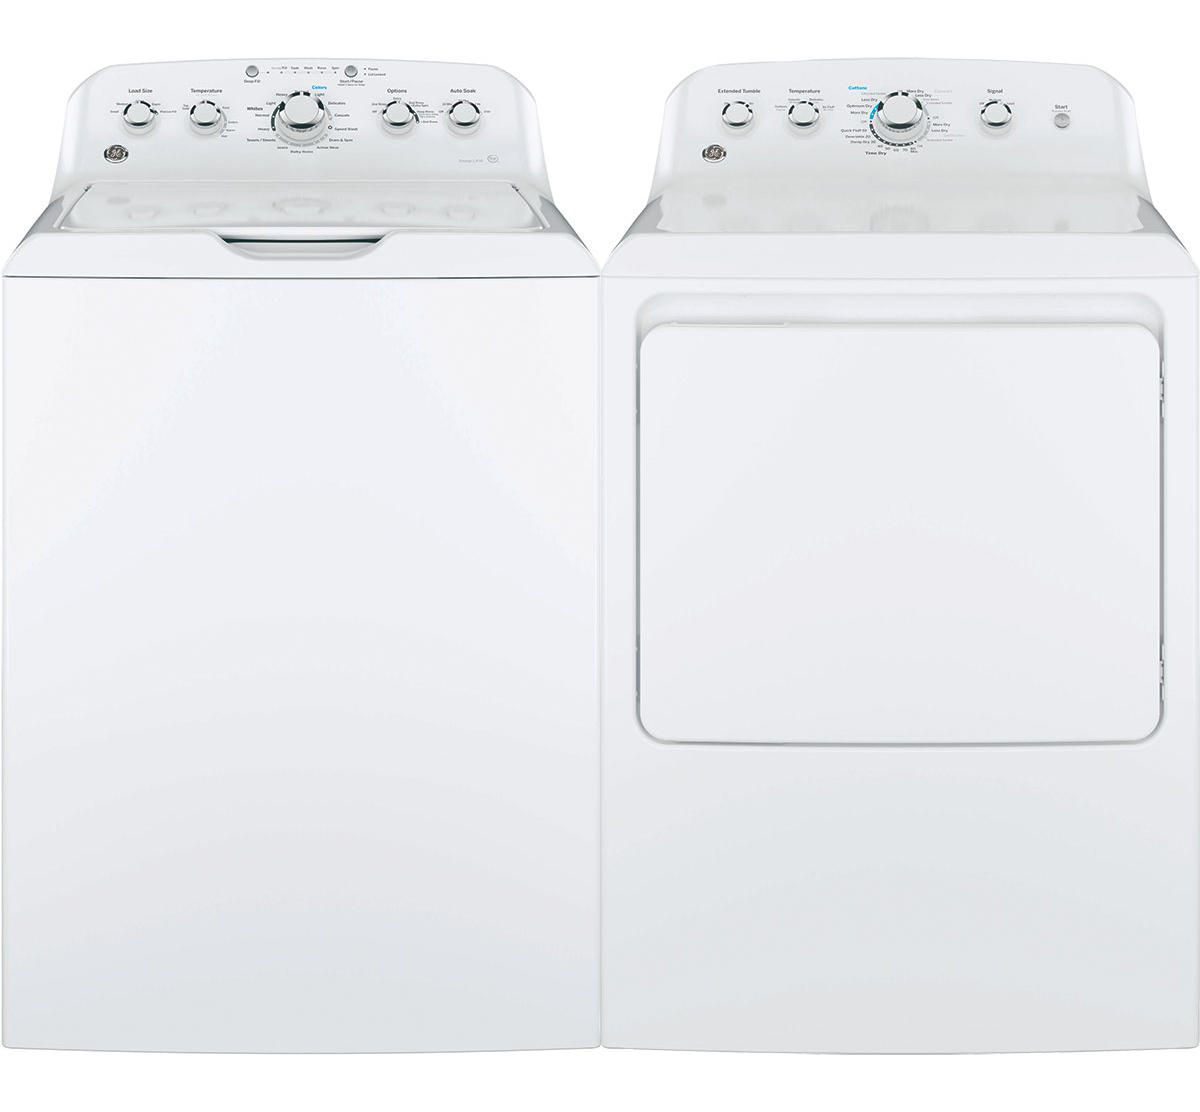 GE Top Load Washer & Dryer Pair | Badcock Home Furniture